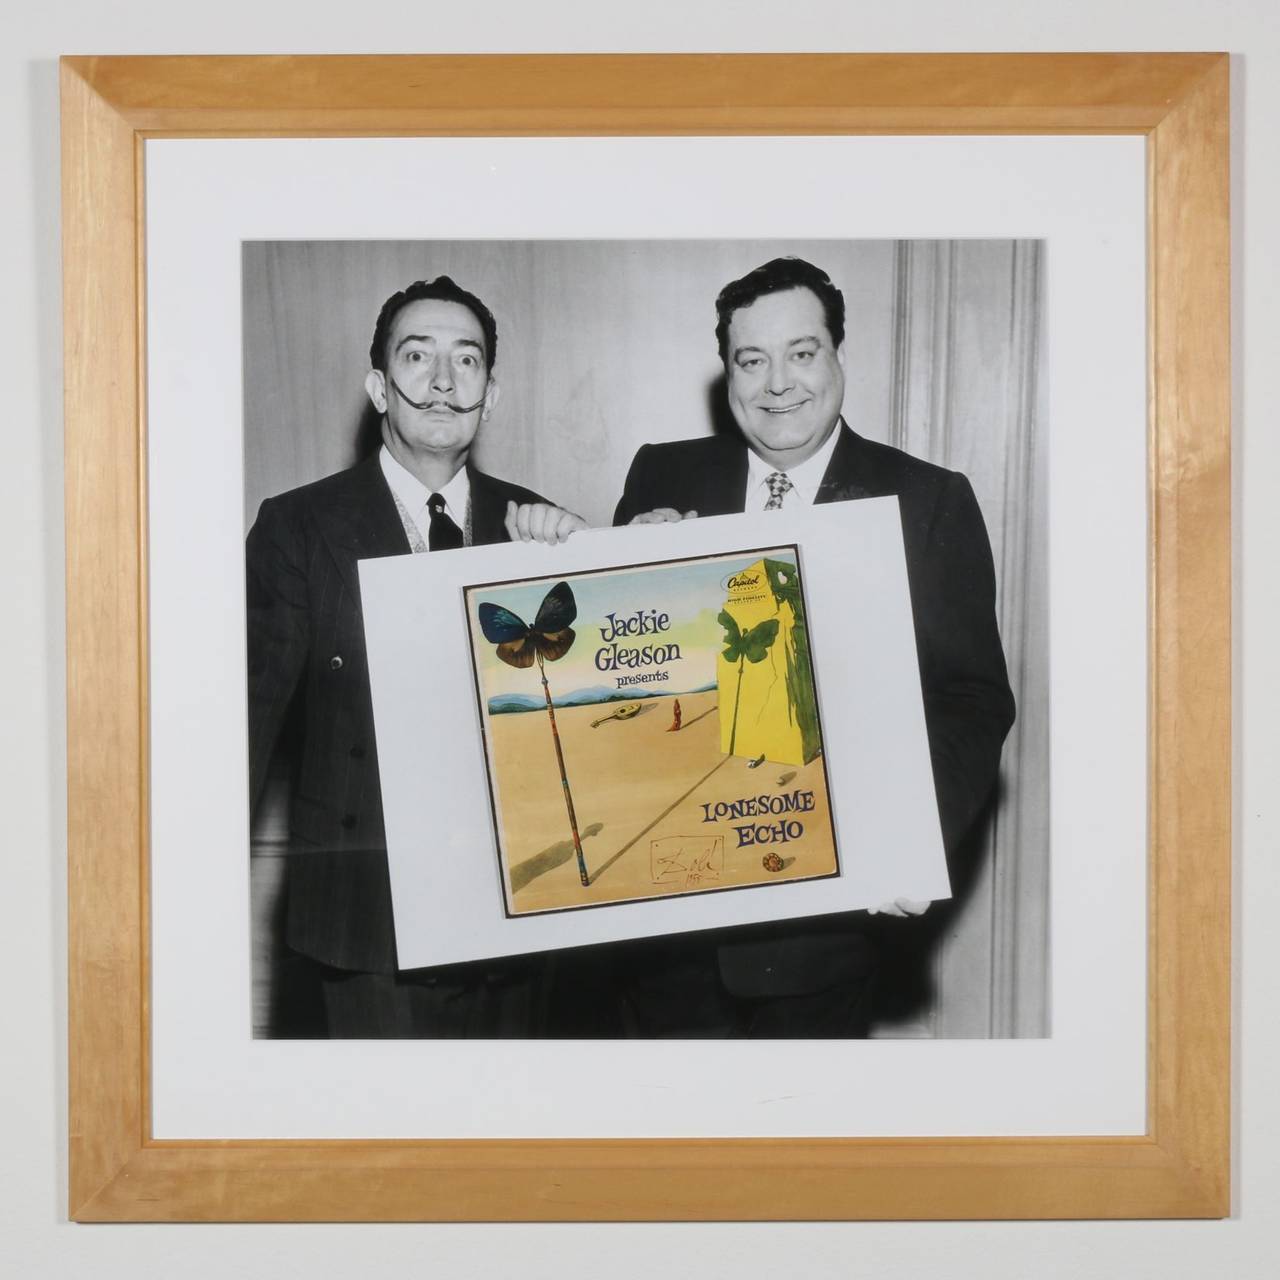 This is a super rare, all original, oversized black and white photograph. It features Jackie Gleason and Salvador Dali, celebrating the creation of Gleason's 1955 album with cover art by Dali. The 30